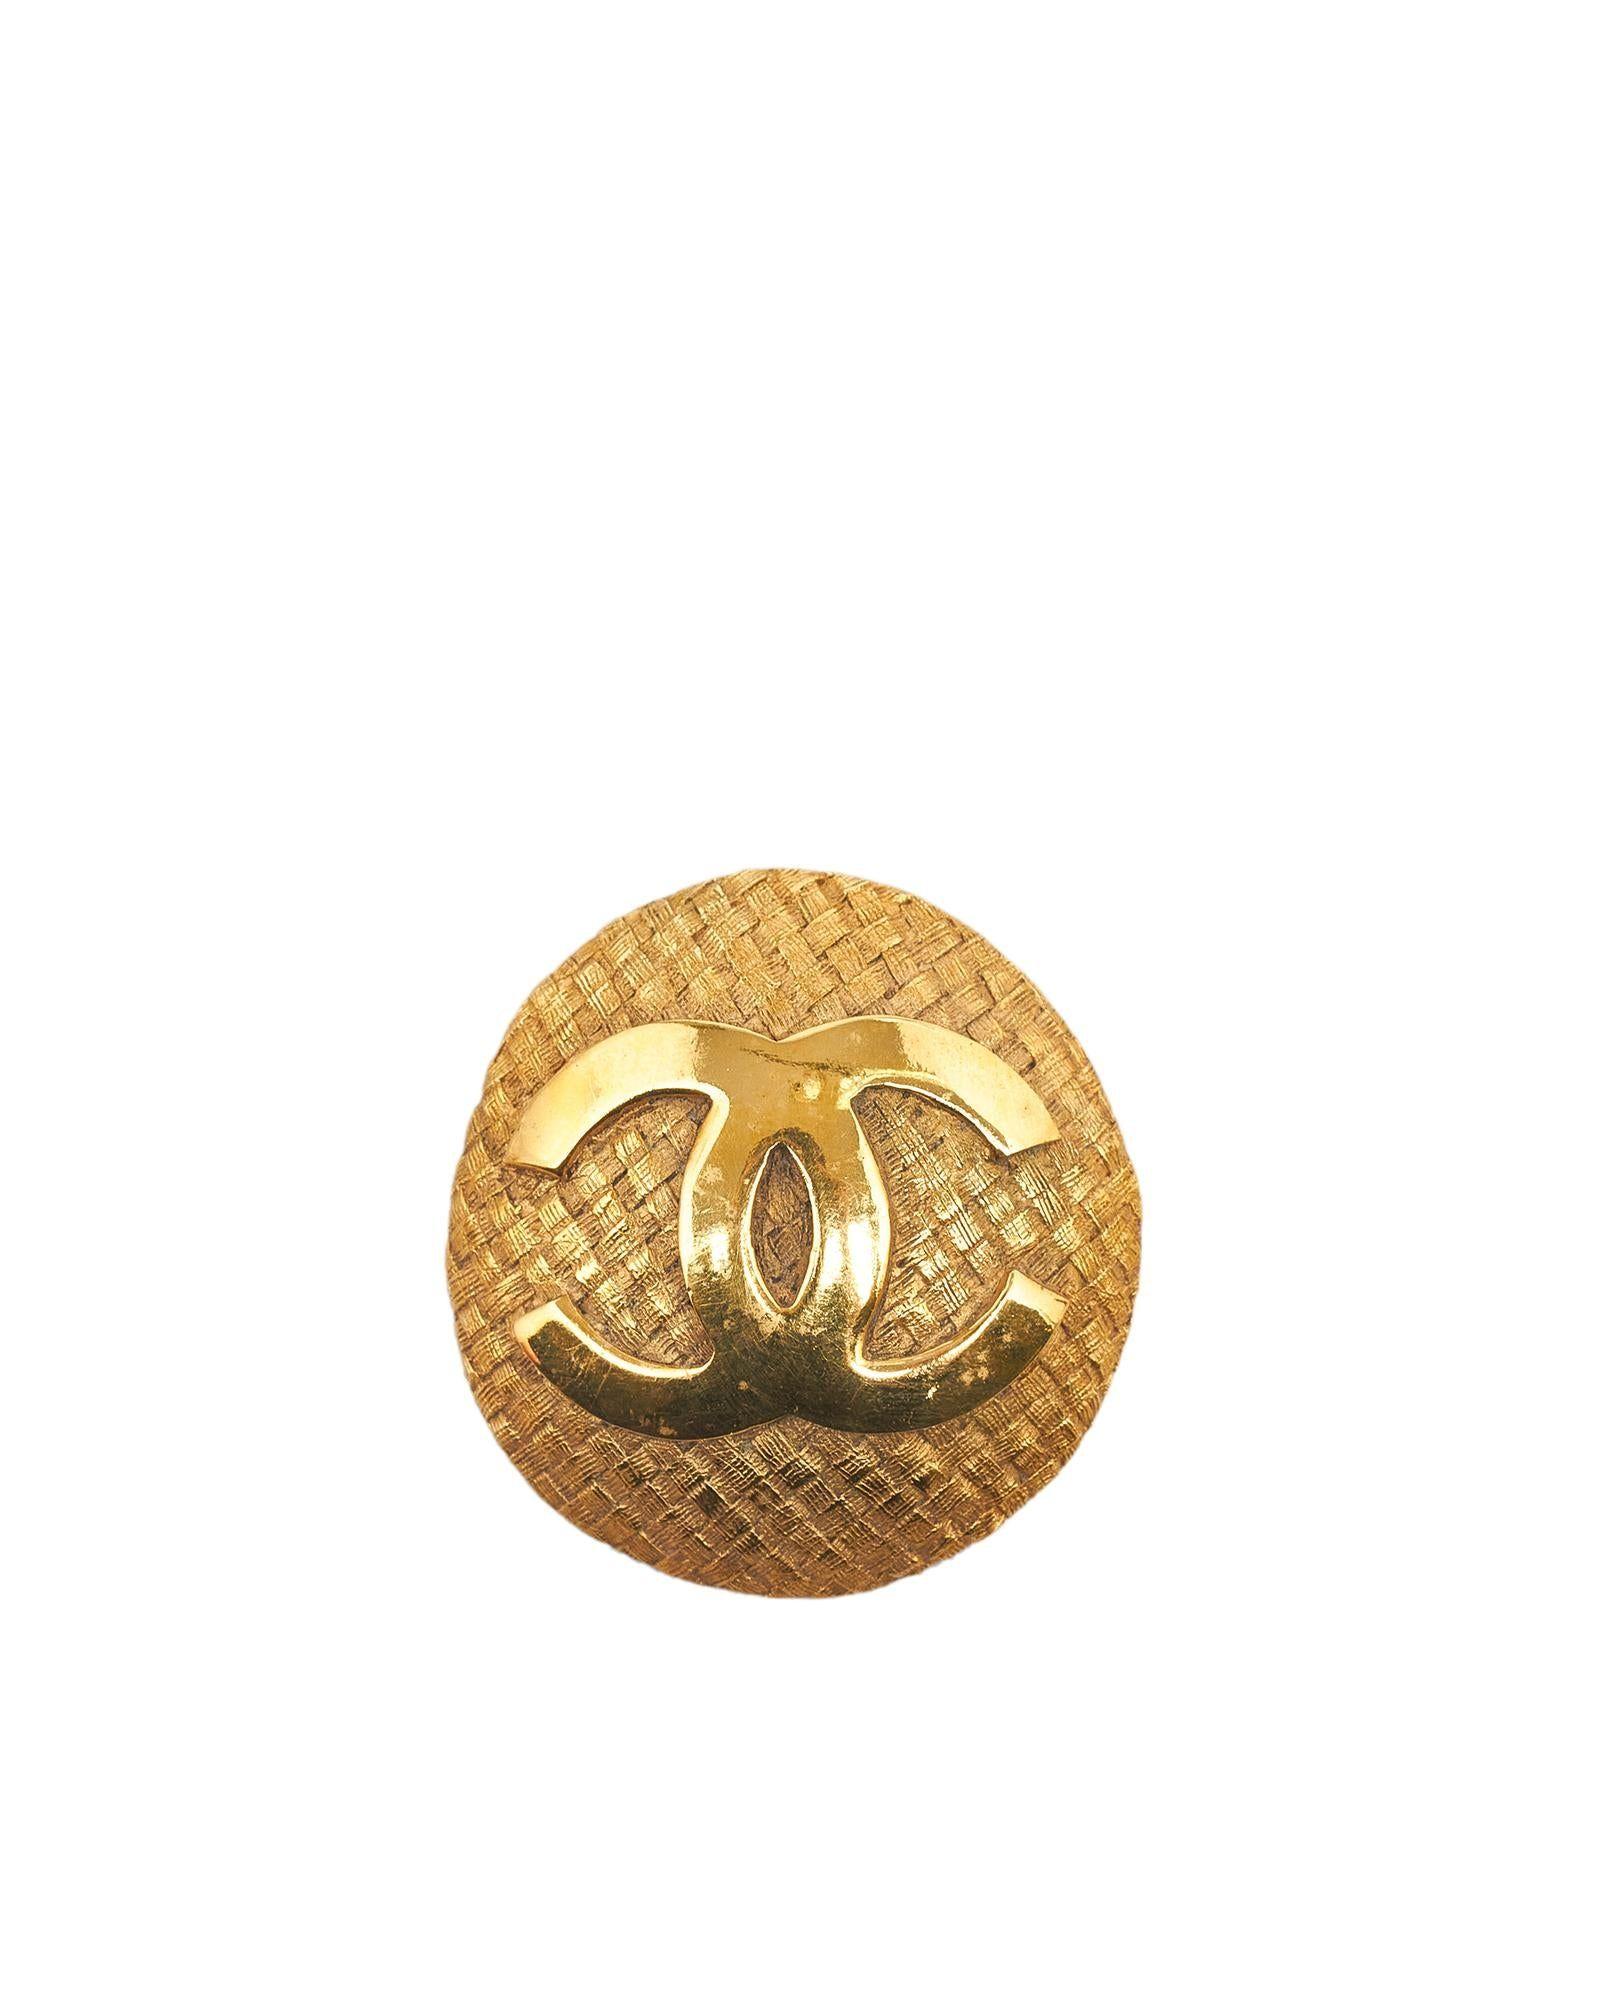 Chanel Metal Brooch With Back Pin Closure in Metallic